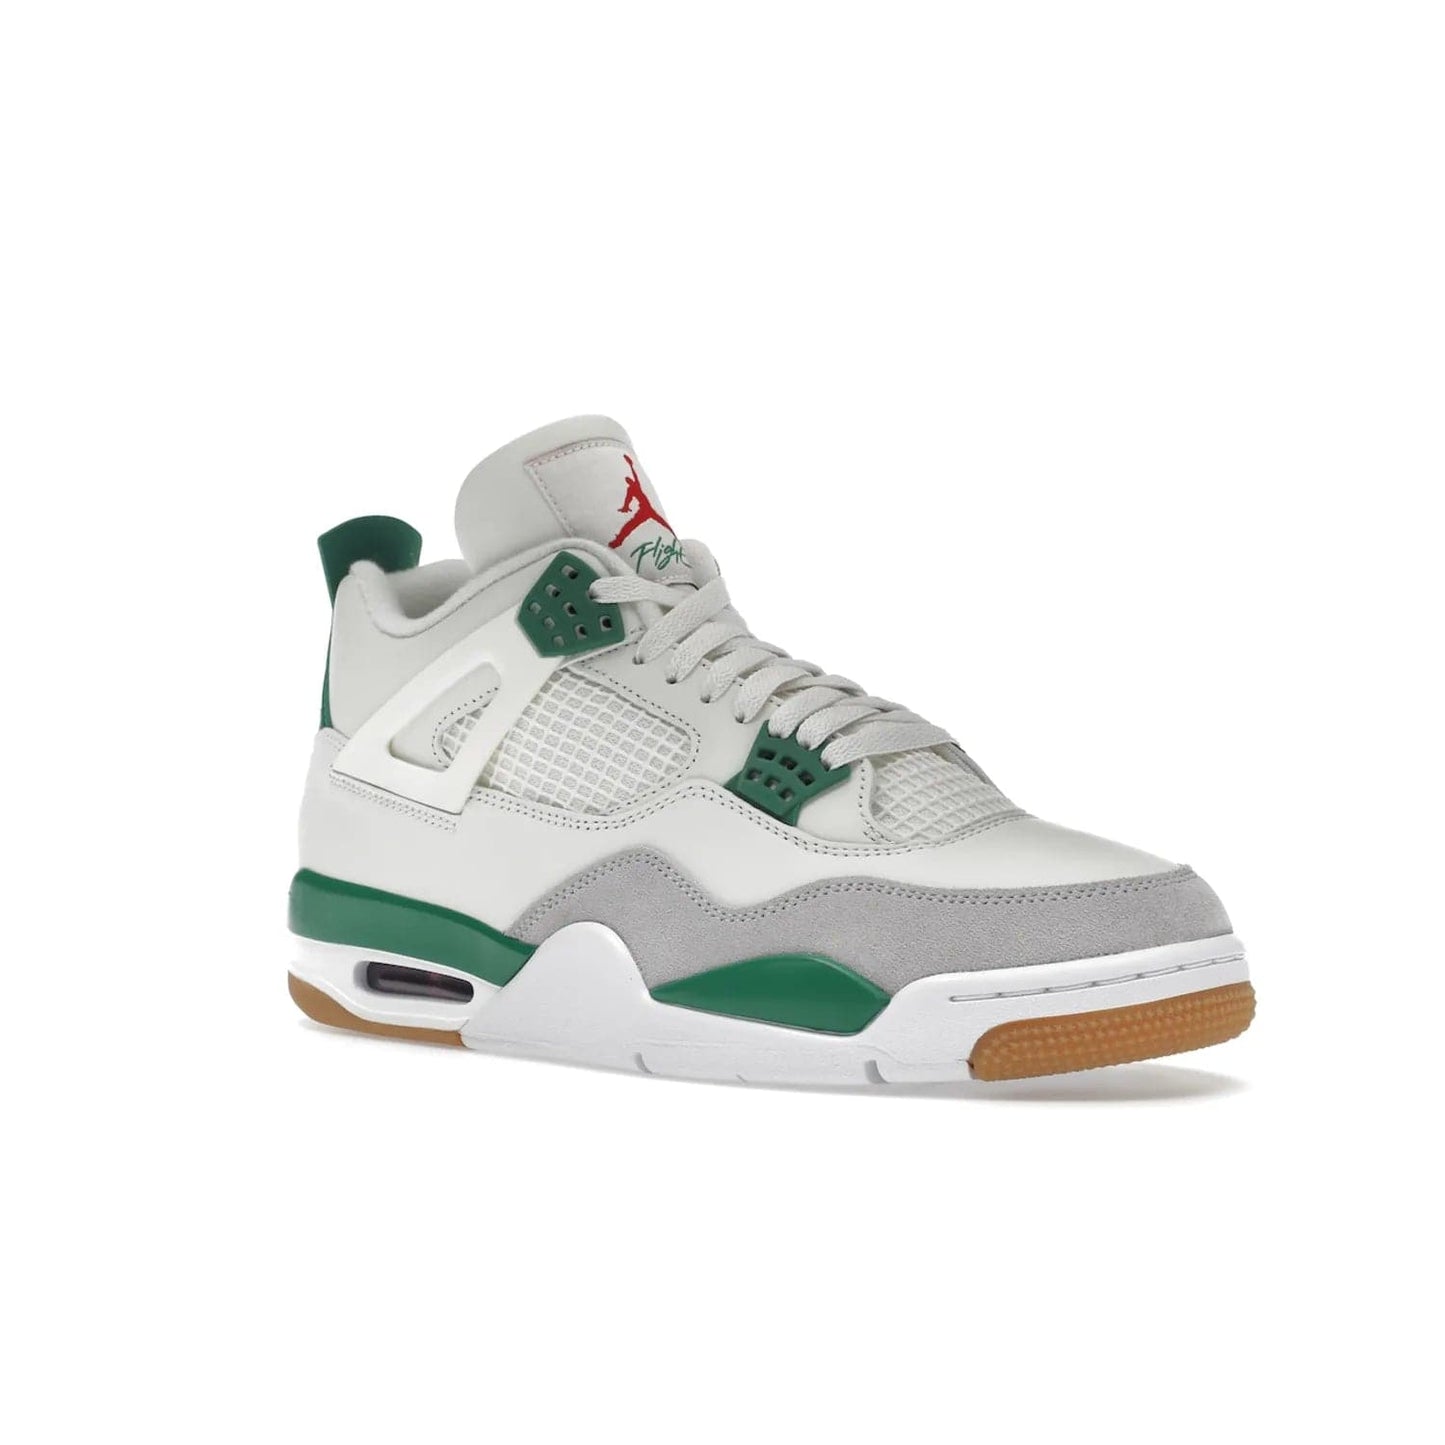 Jordan 4 Retro SB Pine Green - Image 5 - Only at www.BallersClubKickz.com - A white leather upper combined with a Neutral Grey suede mudguard gives this limited Air Jordan 4 Retro SB Pine Green sneaker its unmistakable style. Released March 20, 2023, the Jordan 4 Retro SB features a white and Pine Green midsole plus a red air unit with a gum outsole for grip. The perfect blend of Nike SB skateboarding and Jordan 4 classic design.